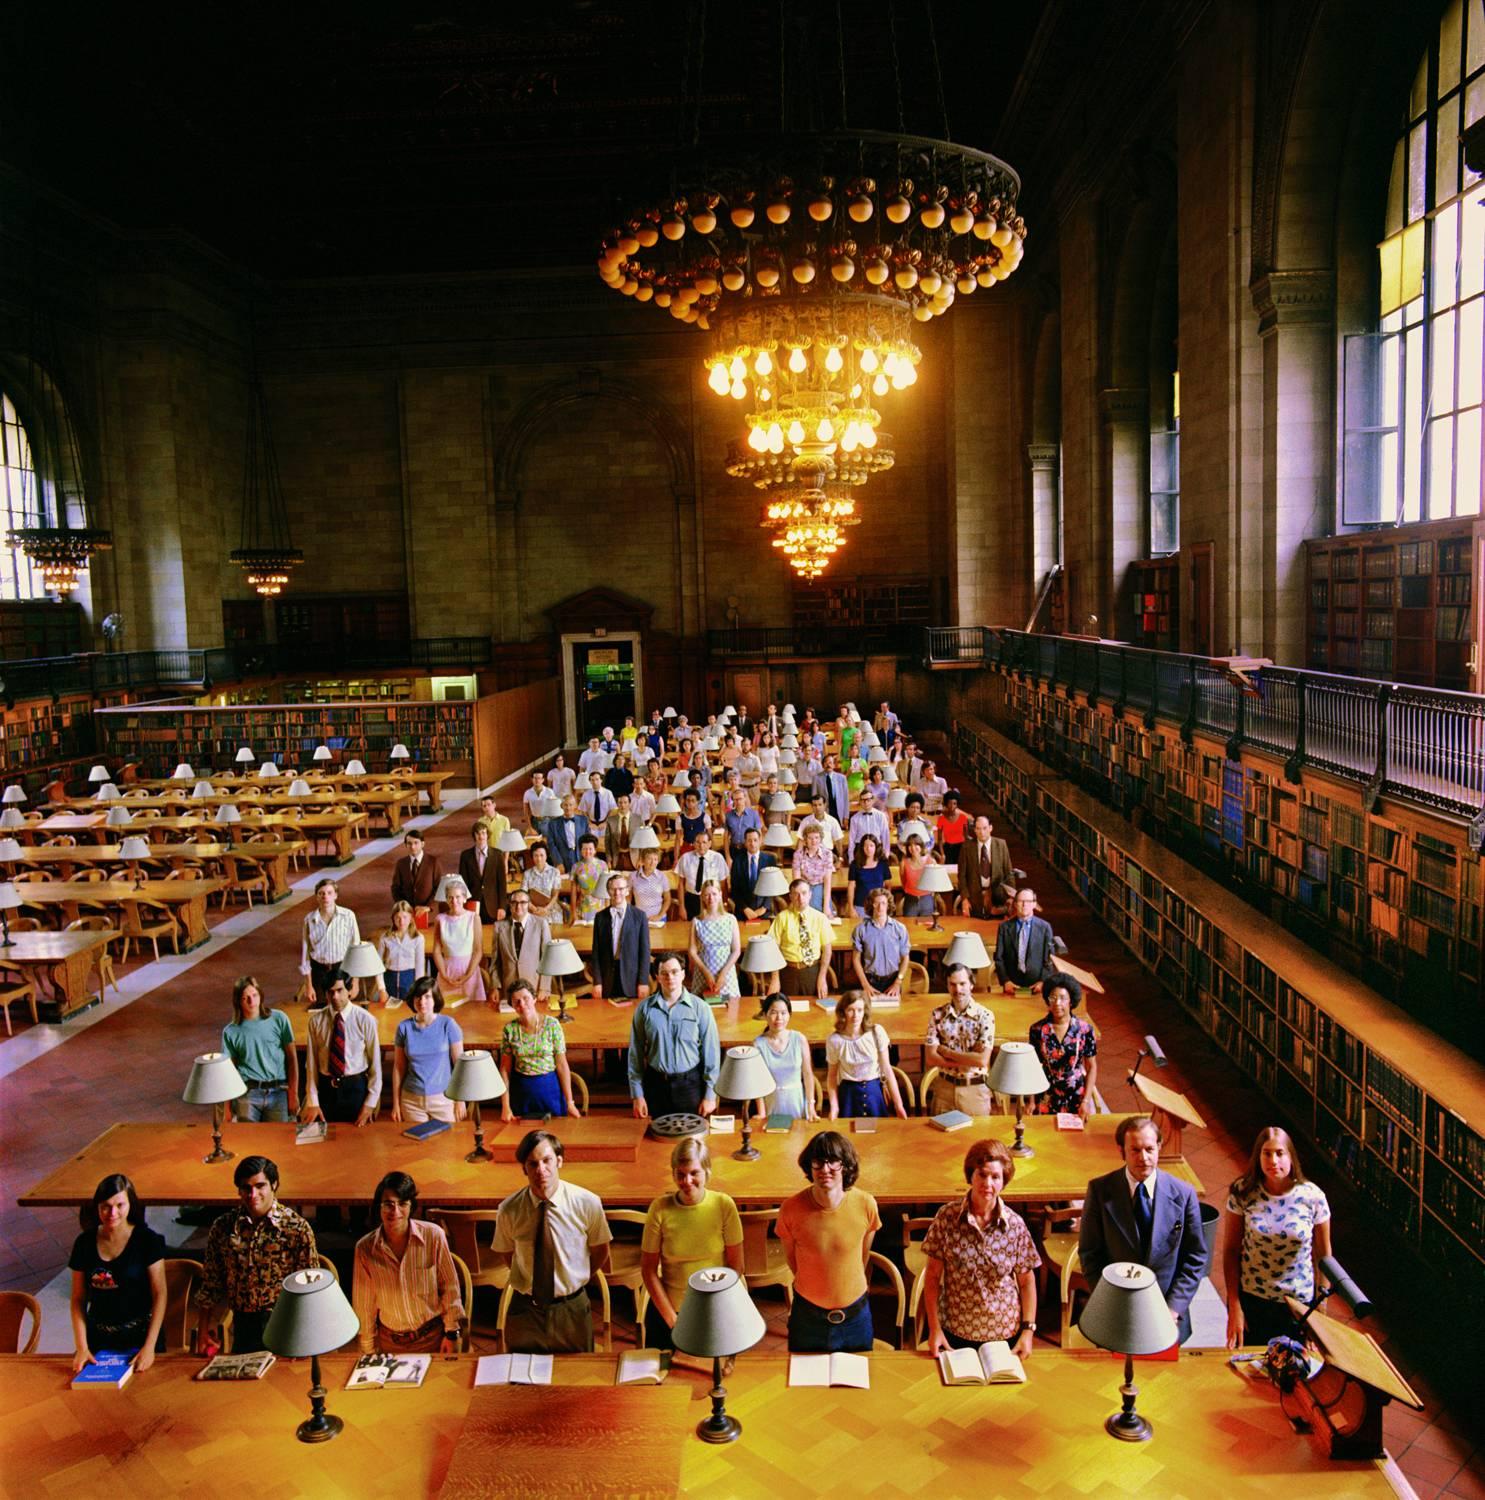 Neal Slavin Color Photograph - Staff of New York Public Library, Main Reading Room, New York City